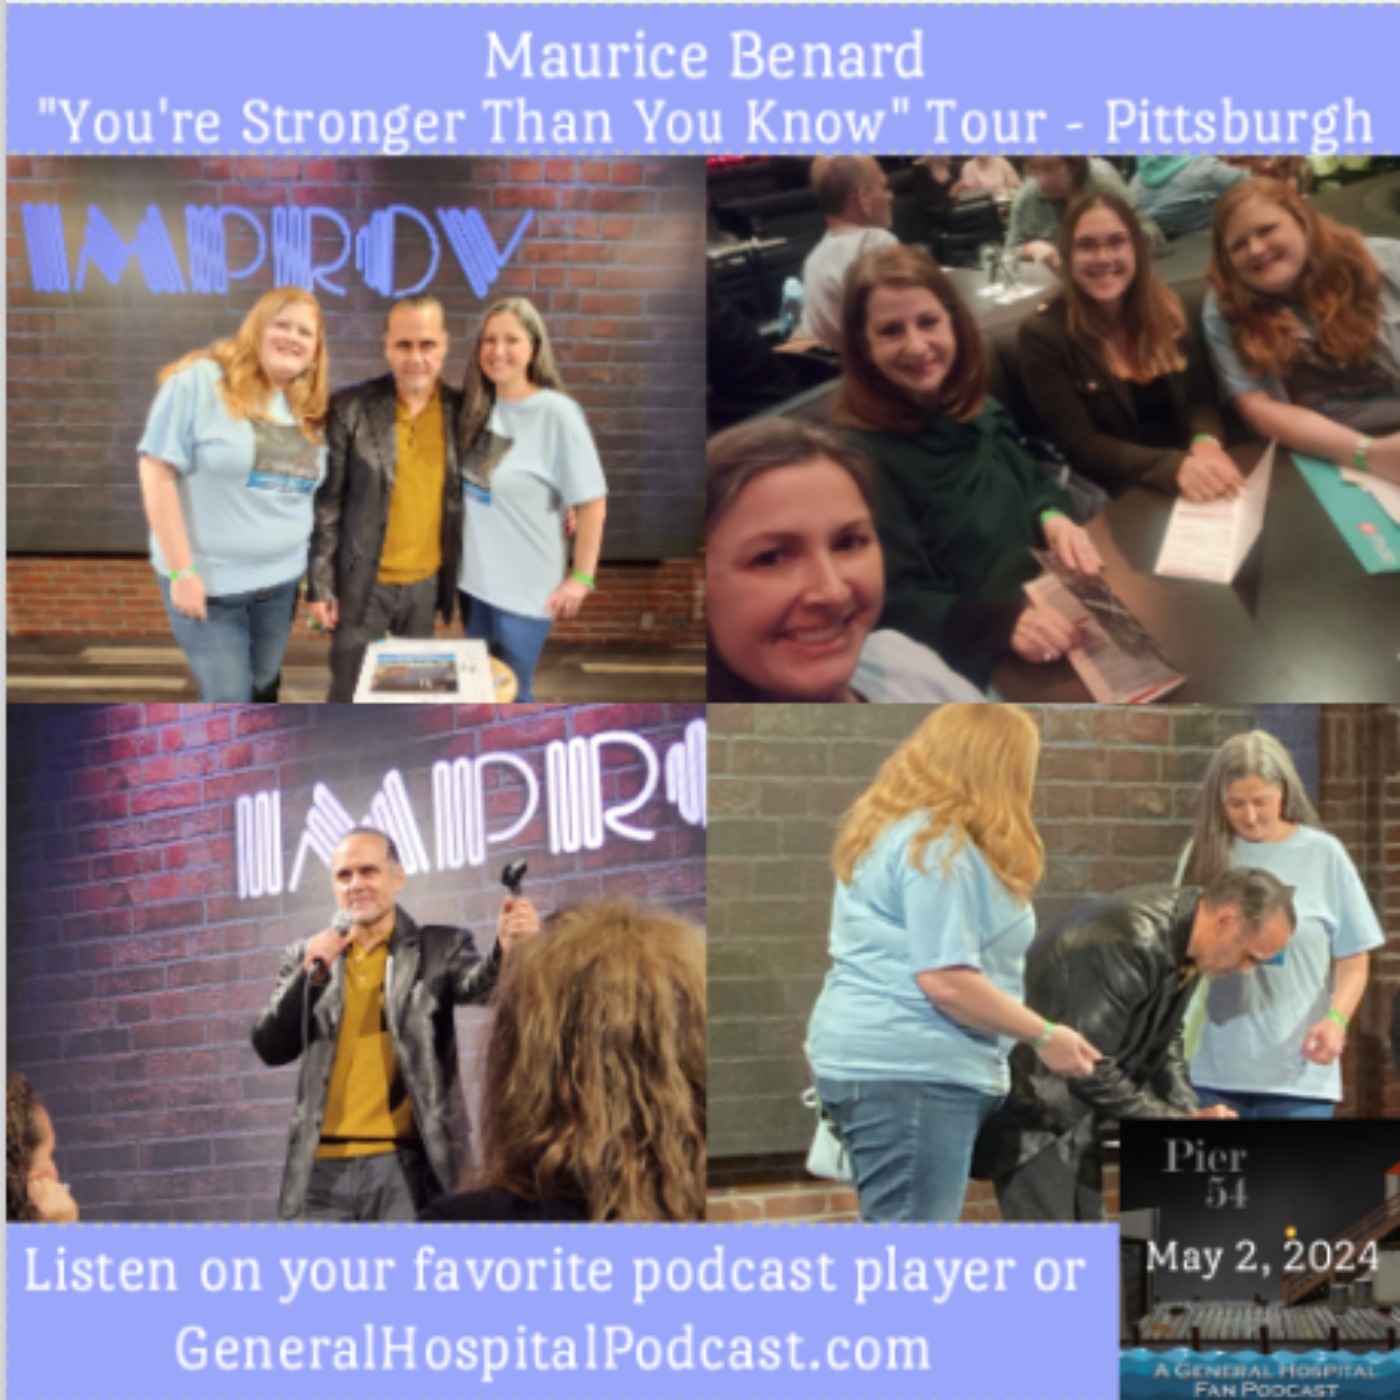 Episode 540: The Port Charles 411 - Maurice Benard "You're Stronger Than You Know" Tour - Pittsburgh